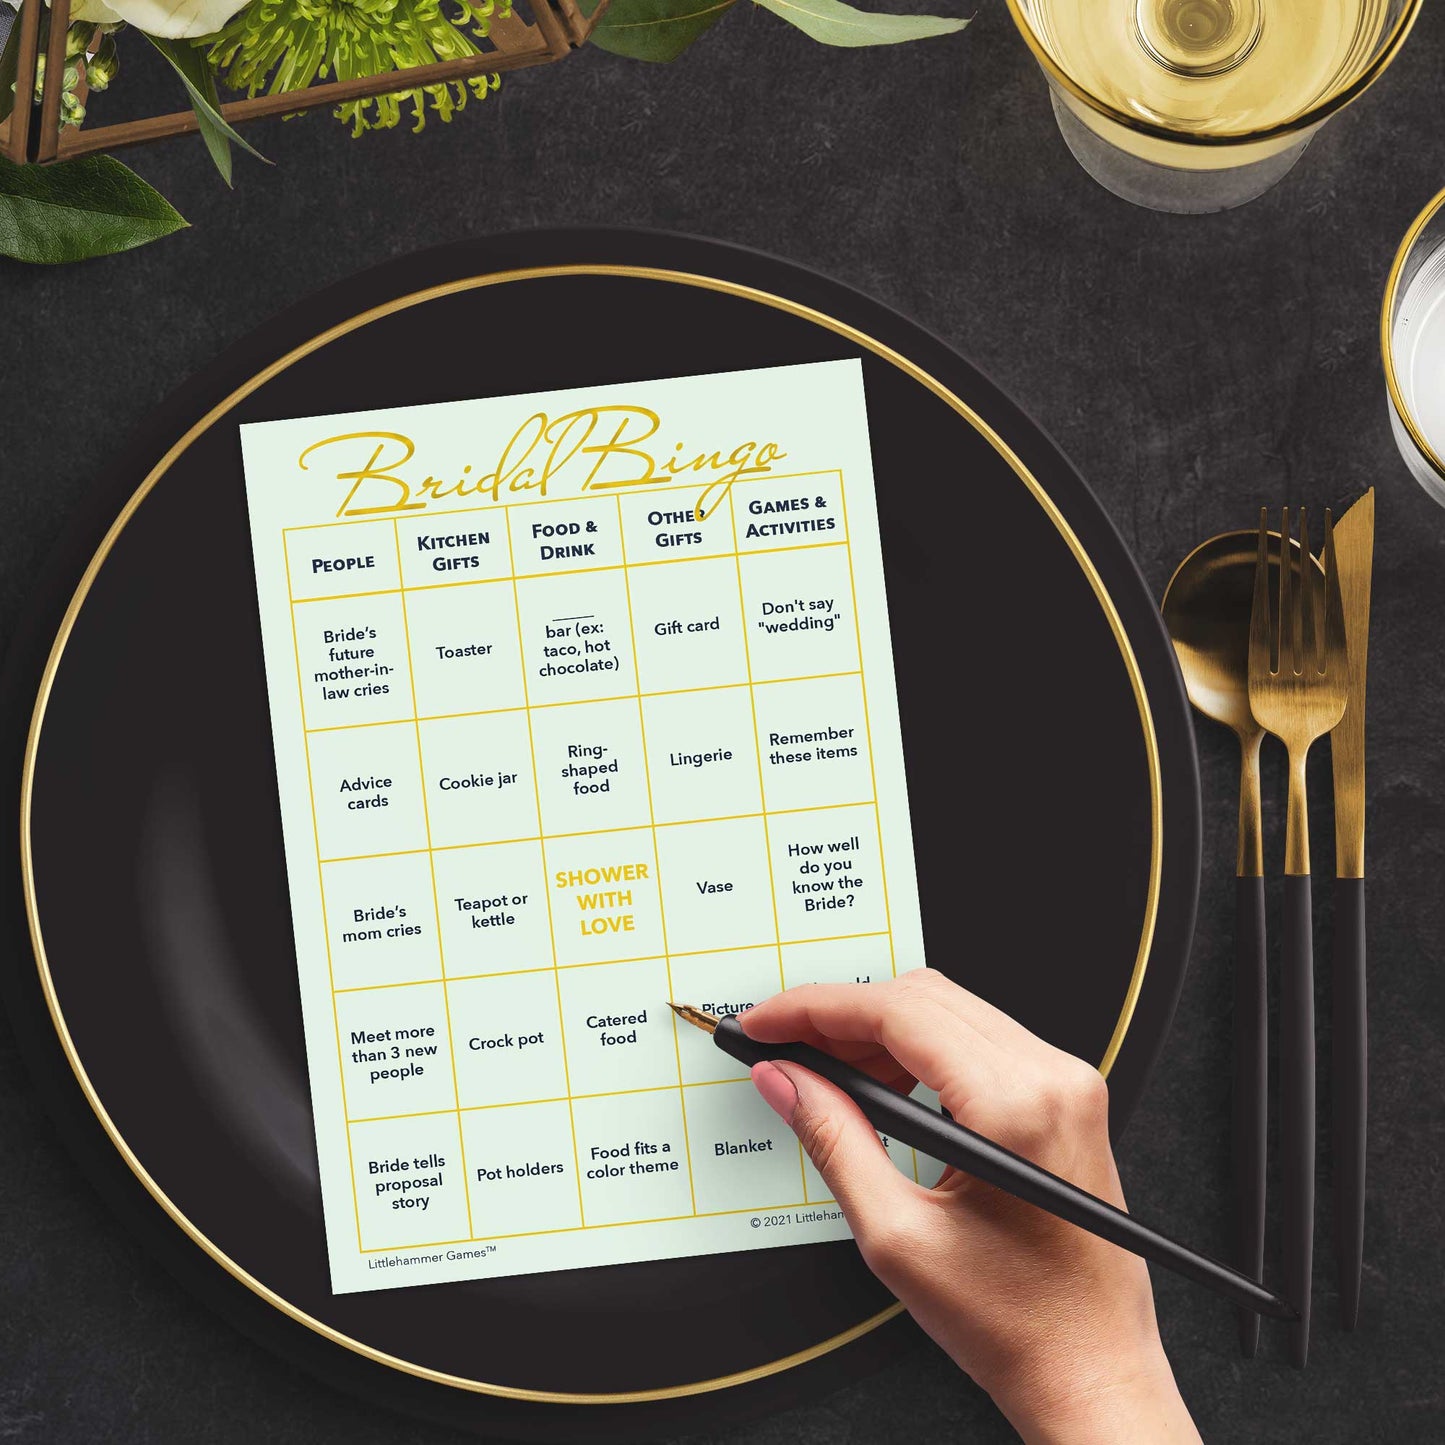 Woman with a pen sitting at a table with a mint and gold Bridal Bingo game card on a black and gold plate at a dark place setting